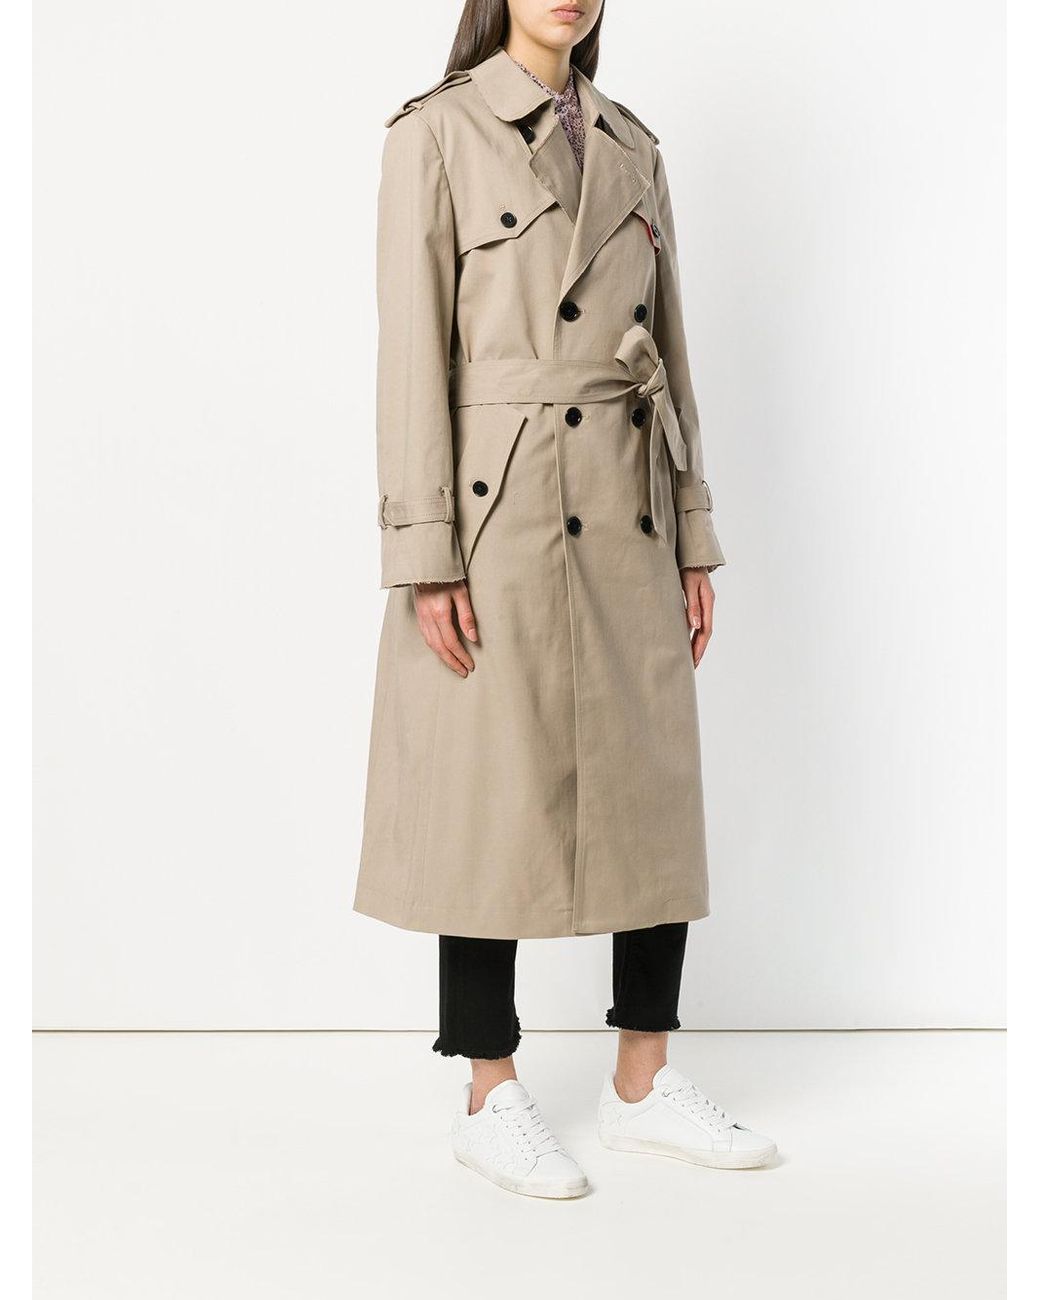 Zadig & Voltaire Mia Trench Coat in Natural | Lyst Canada